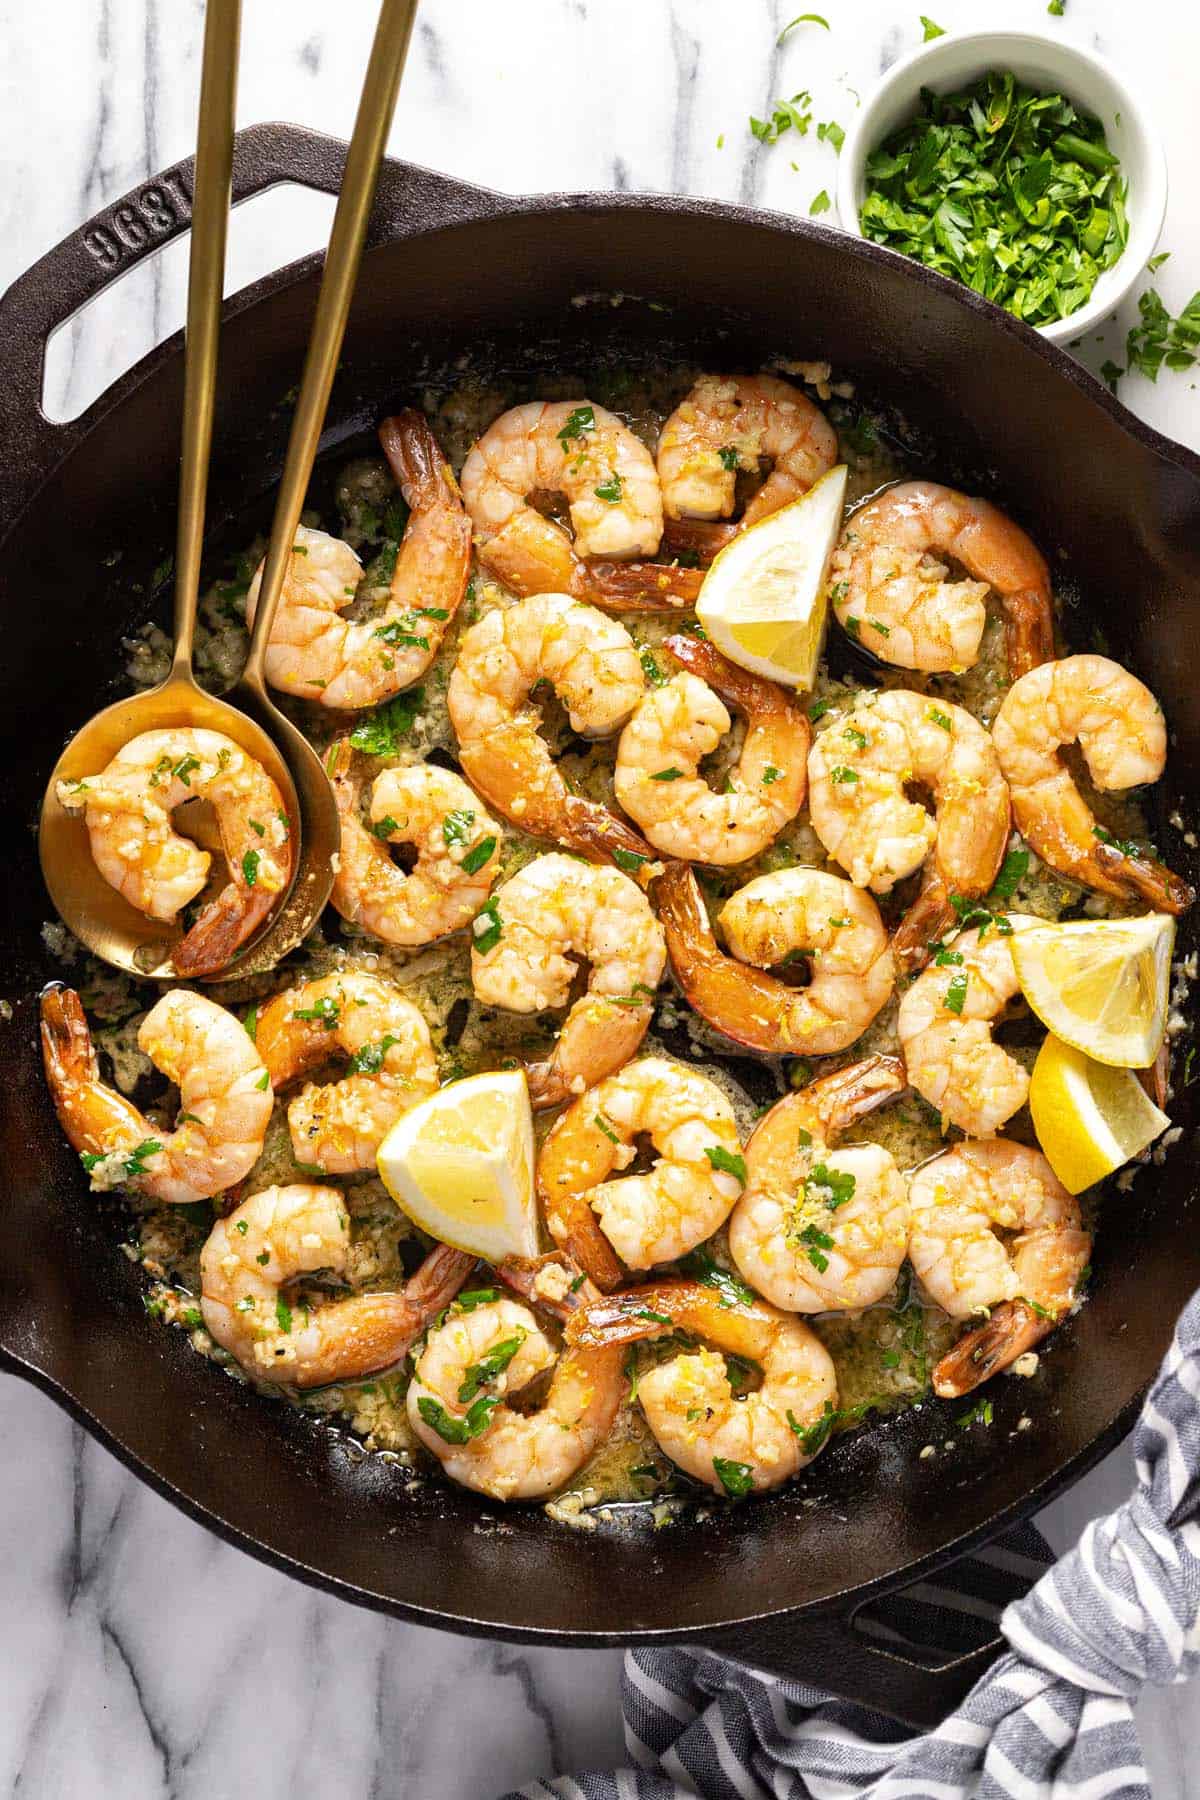 Cast iron pan filled with garlic butter shrimp garnished with lemon wedges.